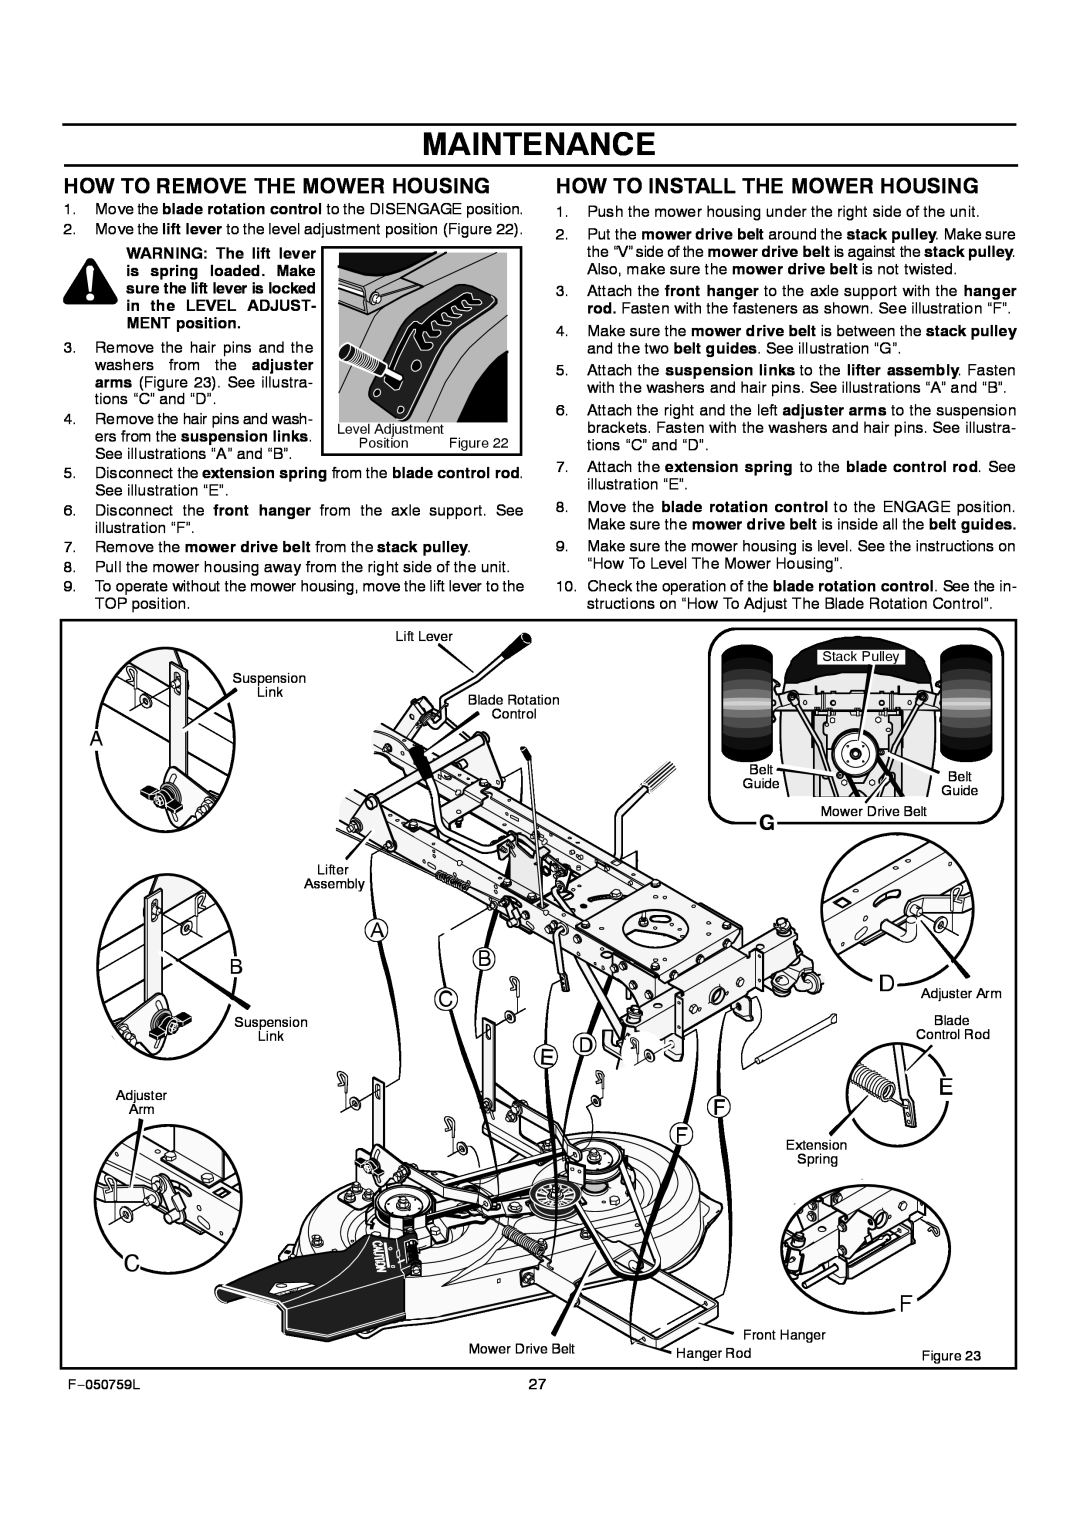 Rover 405012x108A owner manual How To Remove The Mower Housing, How To Install The Mower Housing, Maintenance 